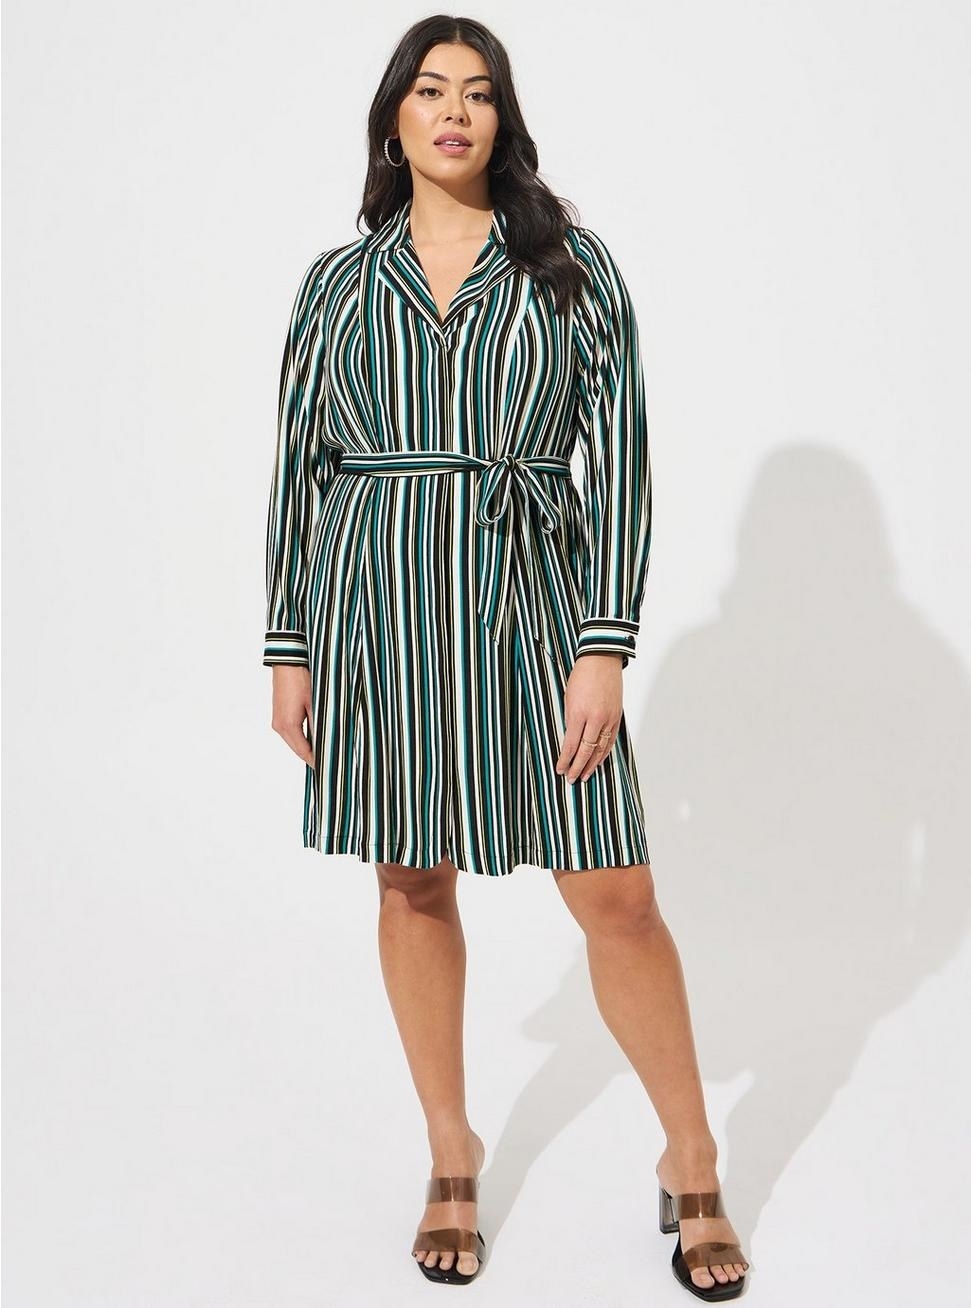 Model wearing blue, brown, and black striped wrap dress with brown sandals